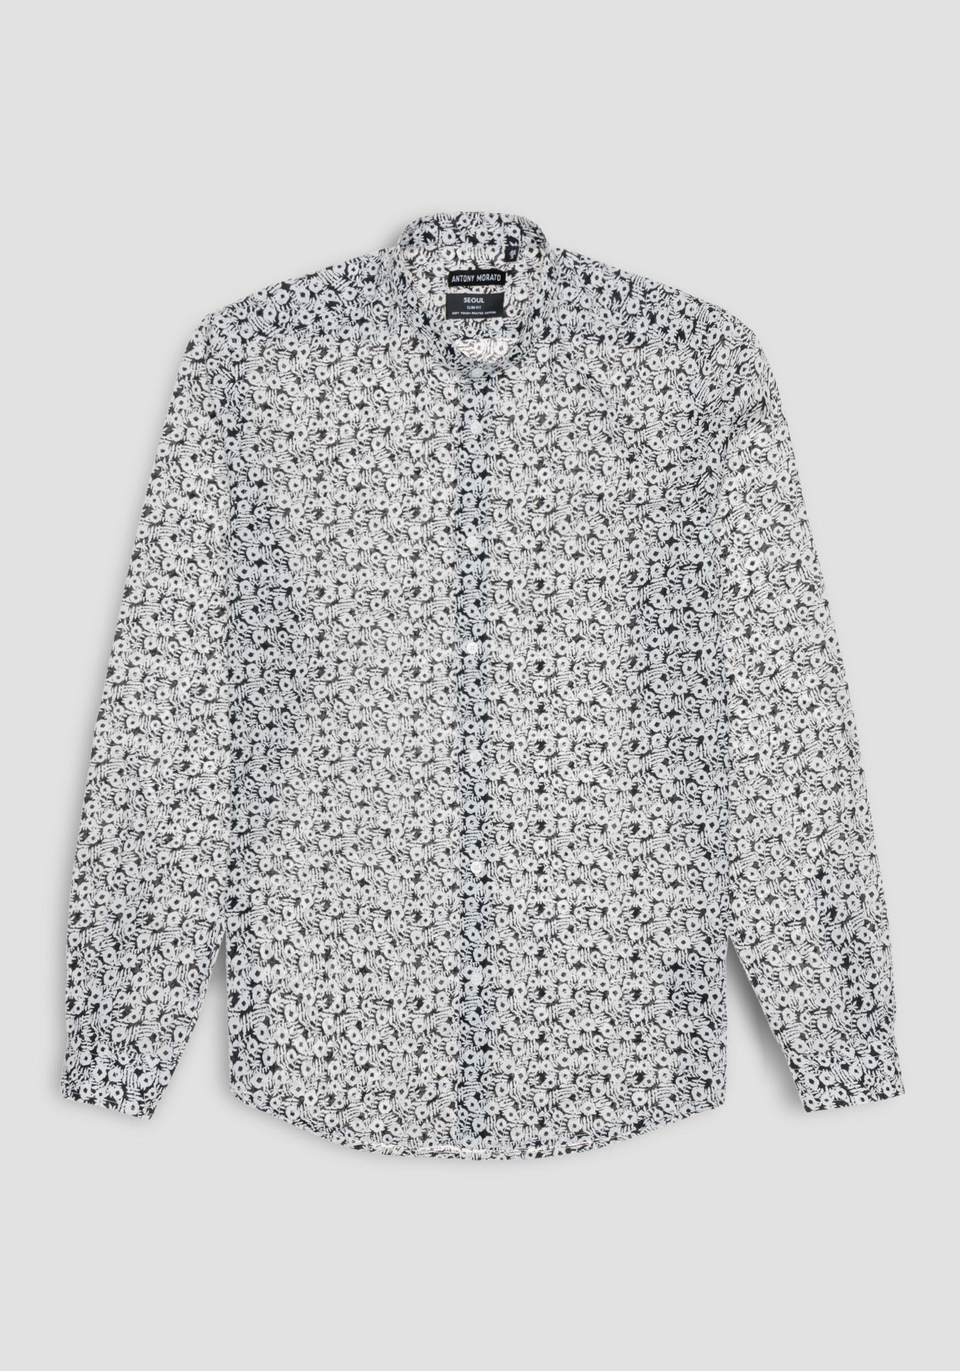 “SEOUL” SLIM FIT SHIRT IN PURE COTTON WITH FLORAL MICROPATTERN - Antony Morato Online Shop